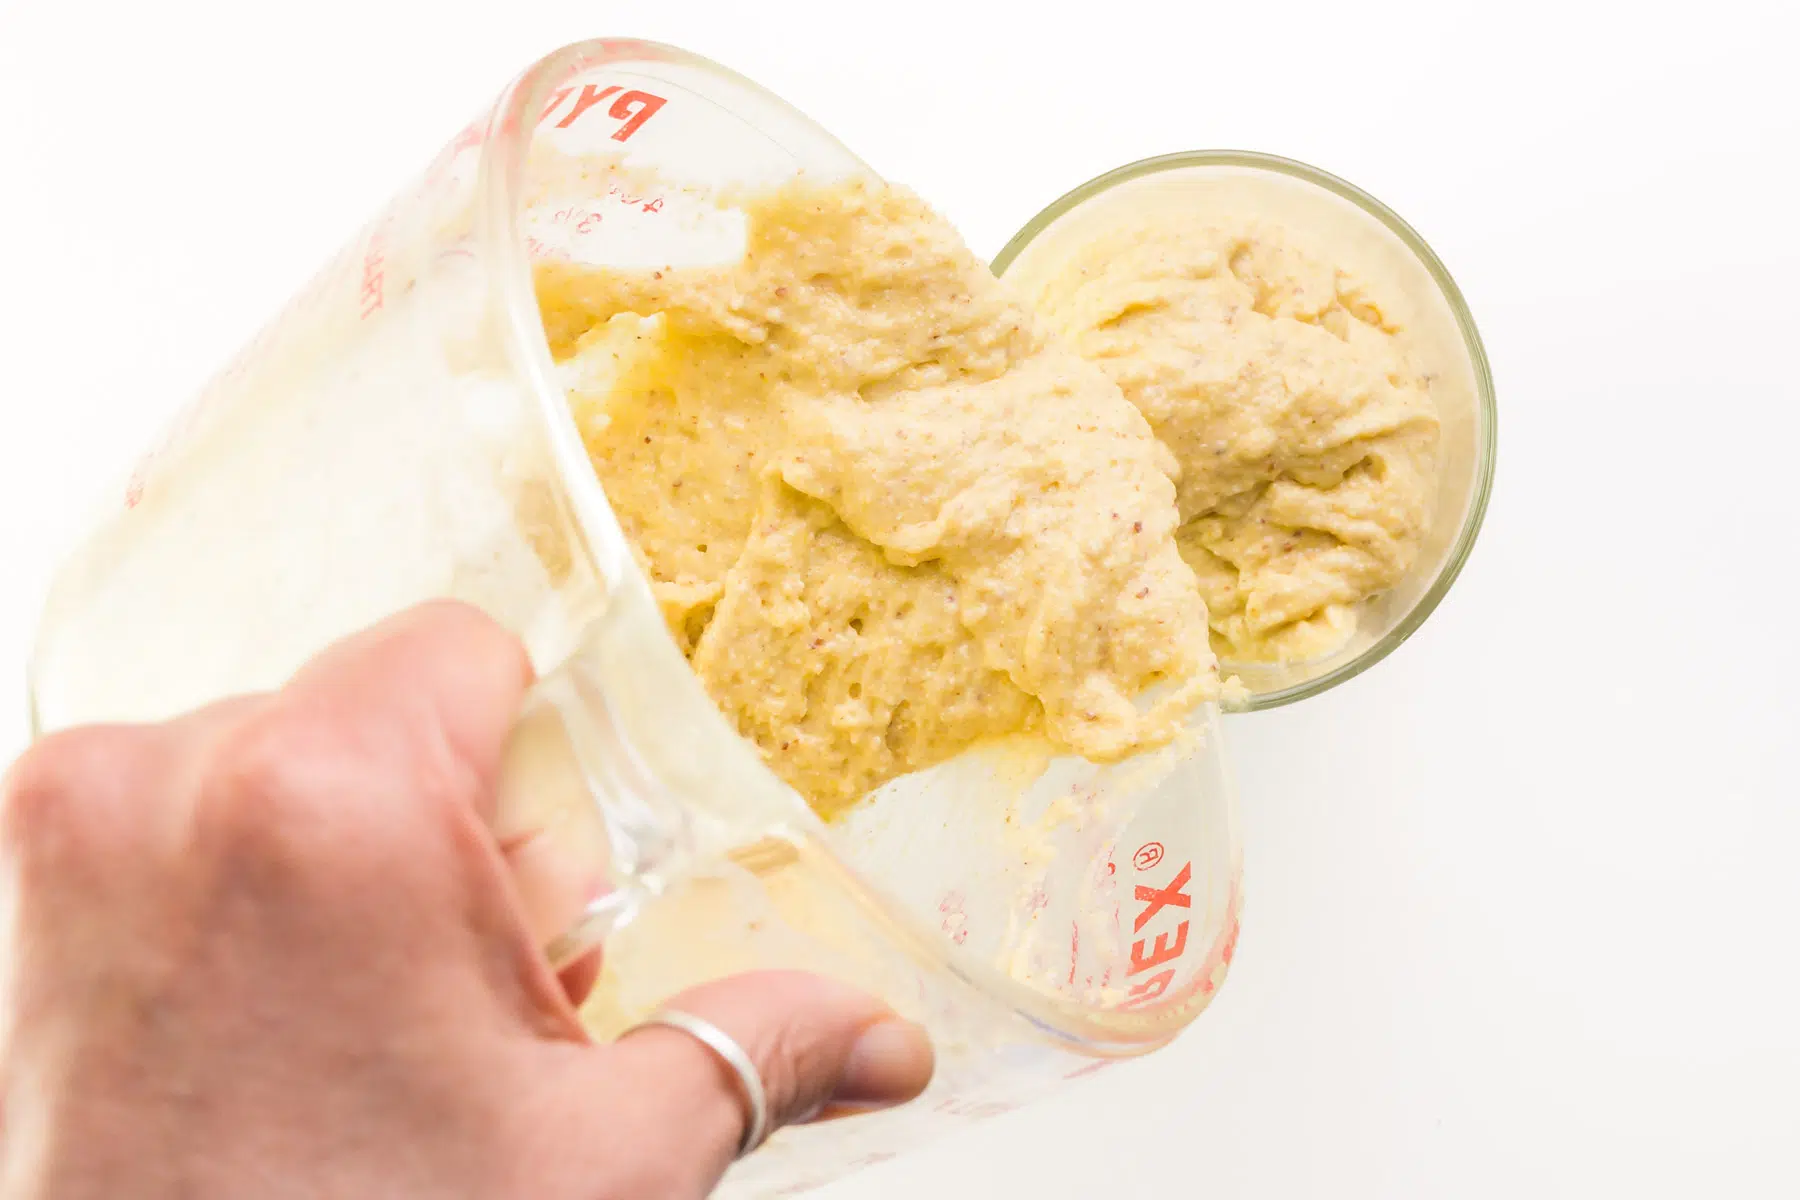 Cornbread batter is being poured from a pyrex measuring cup into tall glass.